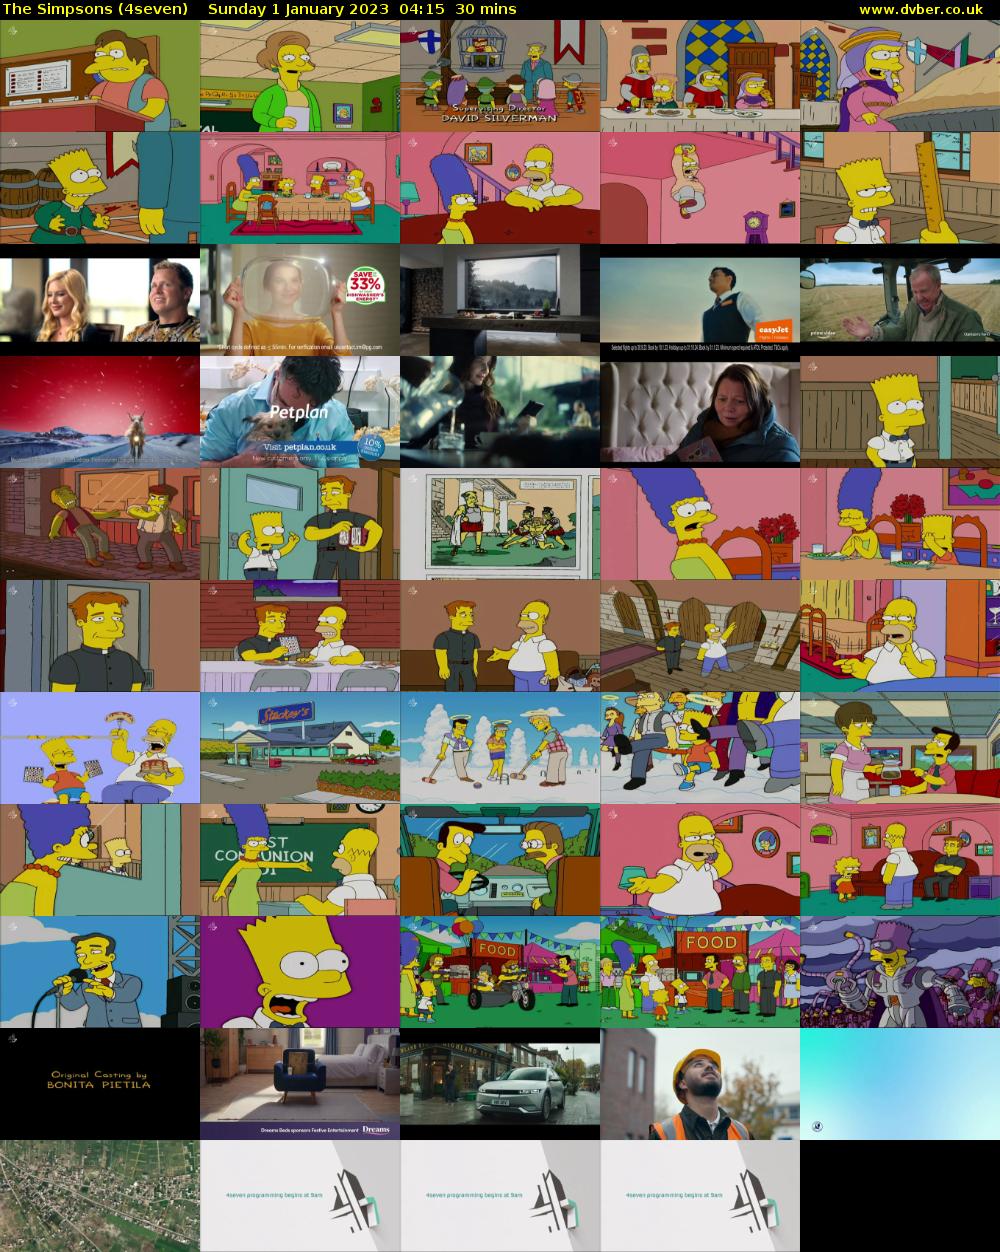 The Simpsons (4seven) Sunday 1 January 2023 04:15 - 04:45